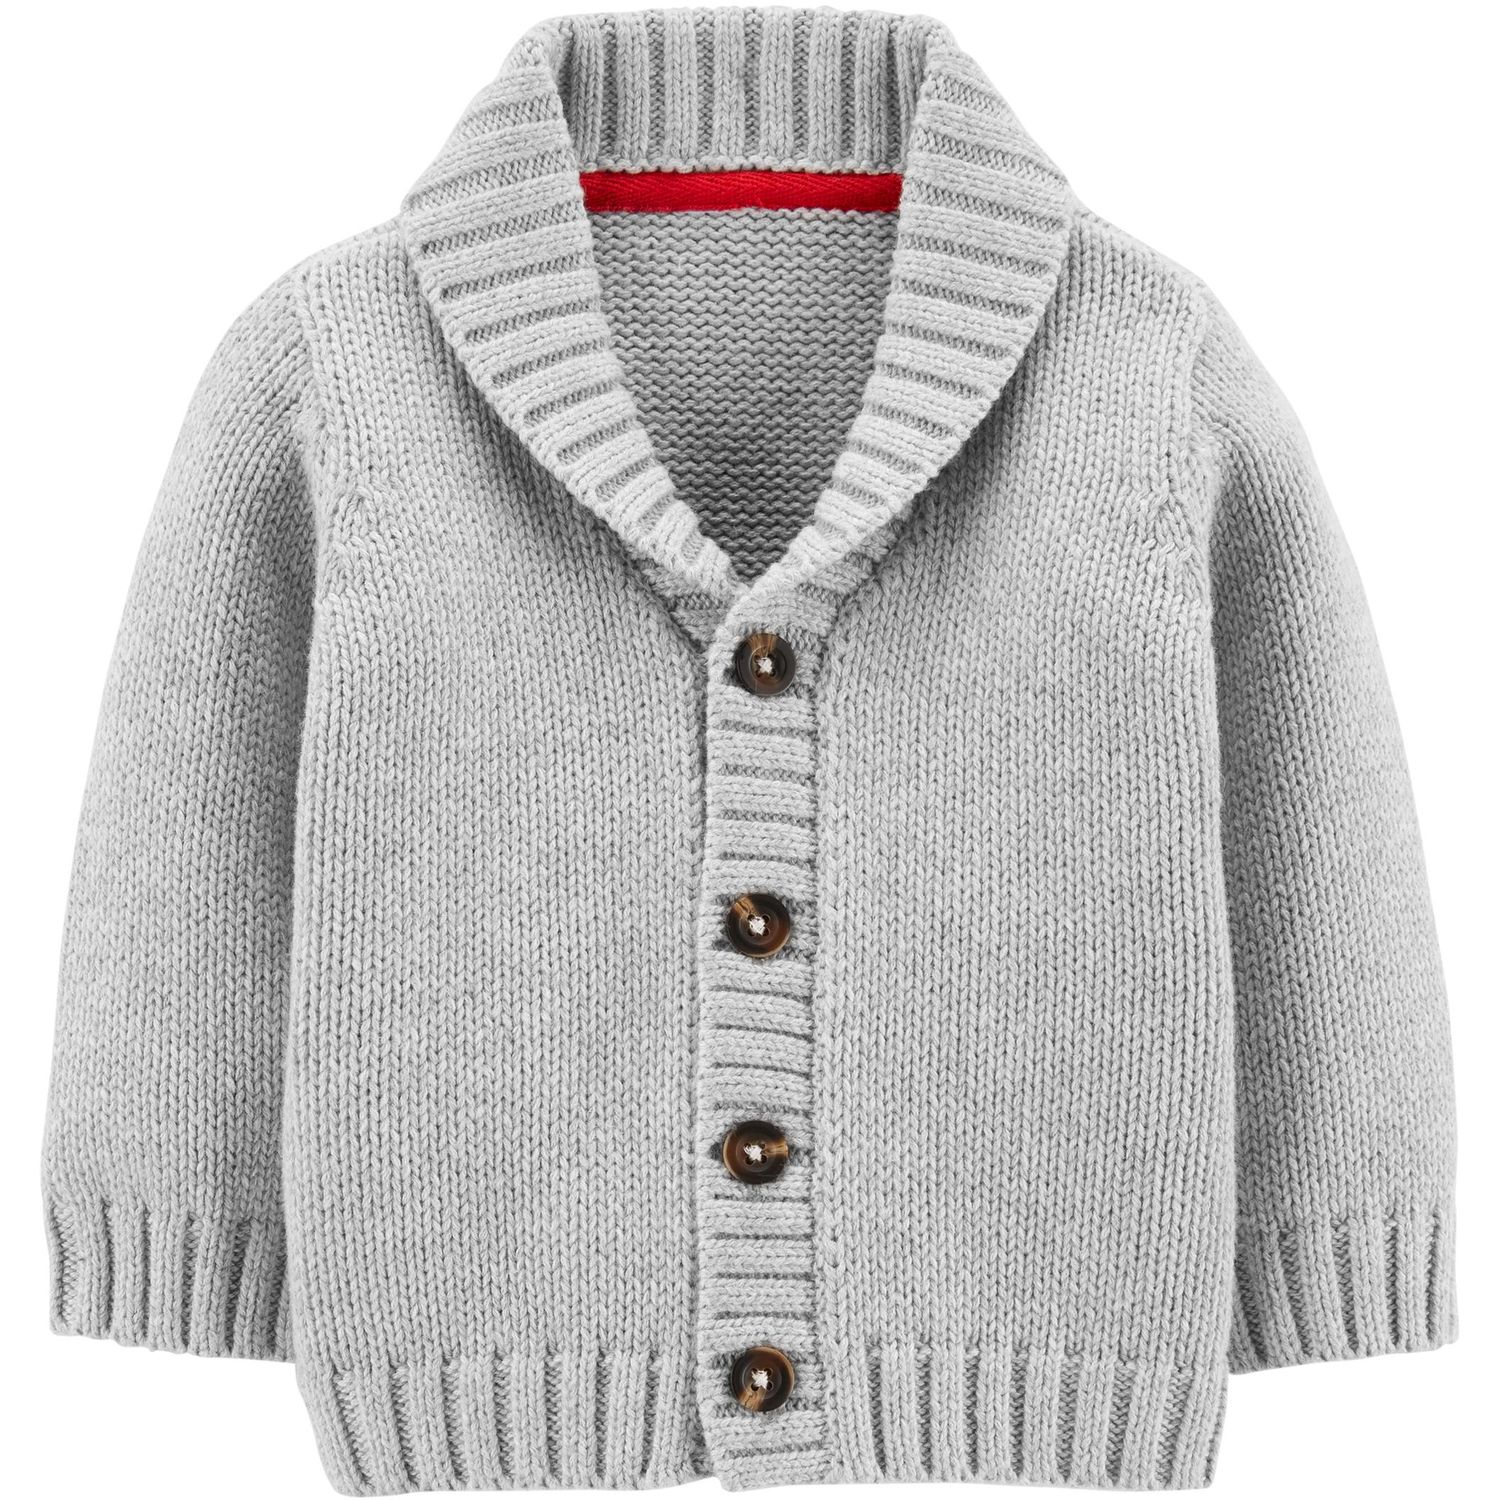 Coodebear Little Baby Boys Vintage Round Collor Thick Cashmere Cardigan Sweater Coats